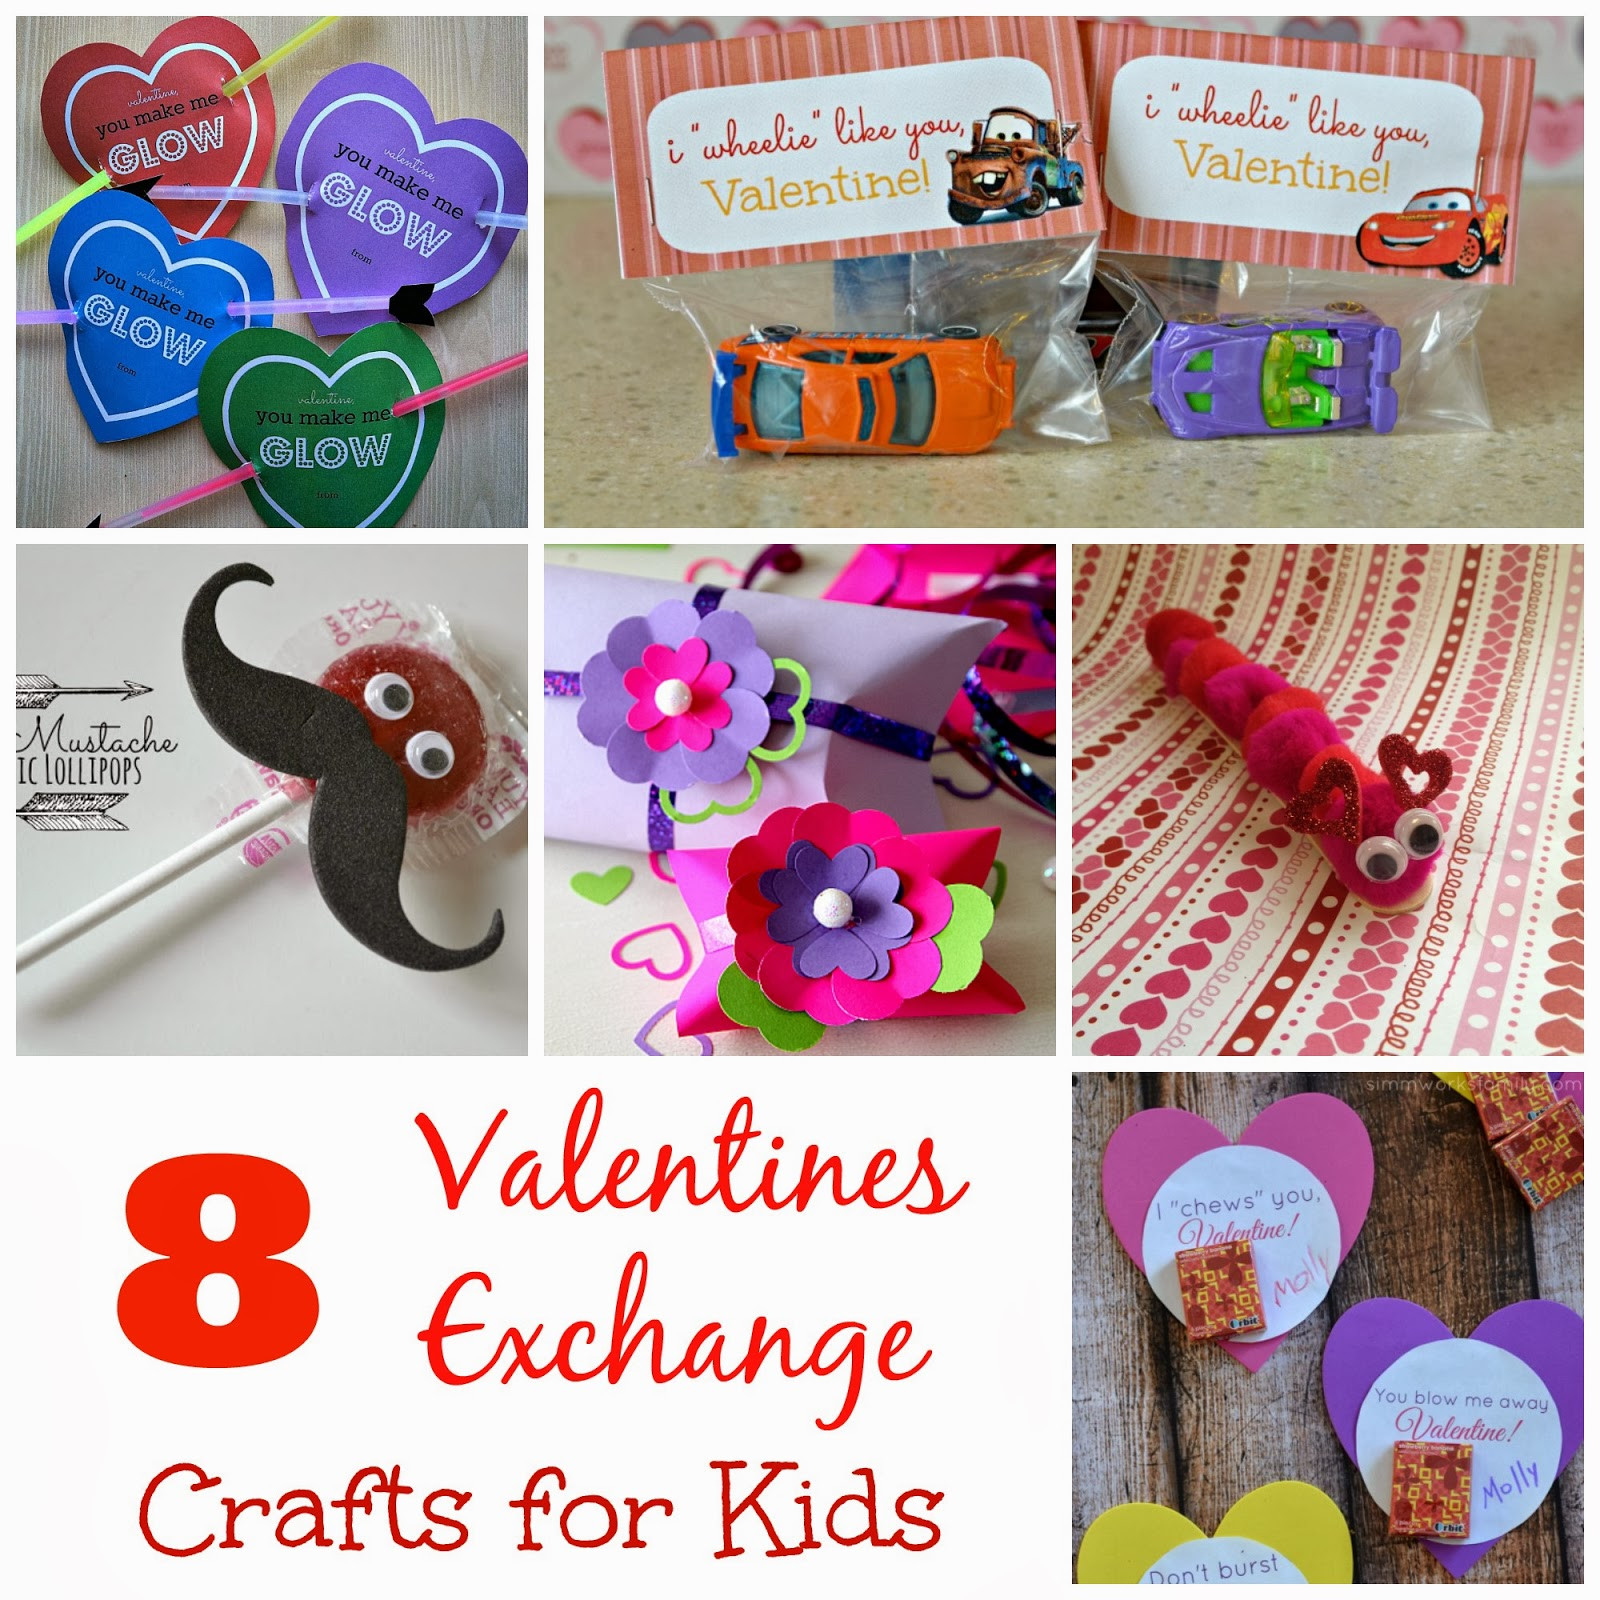 Valentine Gift Ideas For School
 8 Valentines Exchange Crafts for Kids Outnumbered 3 to 1